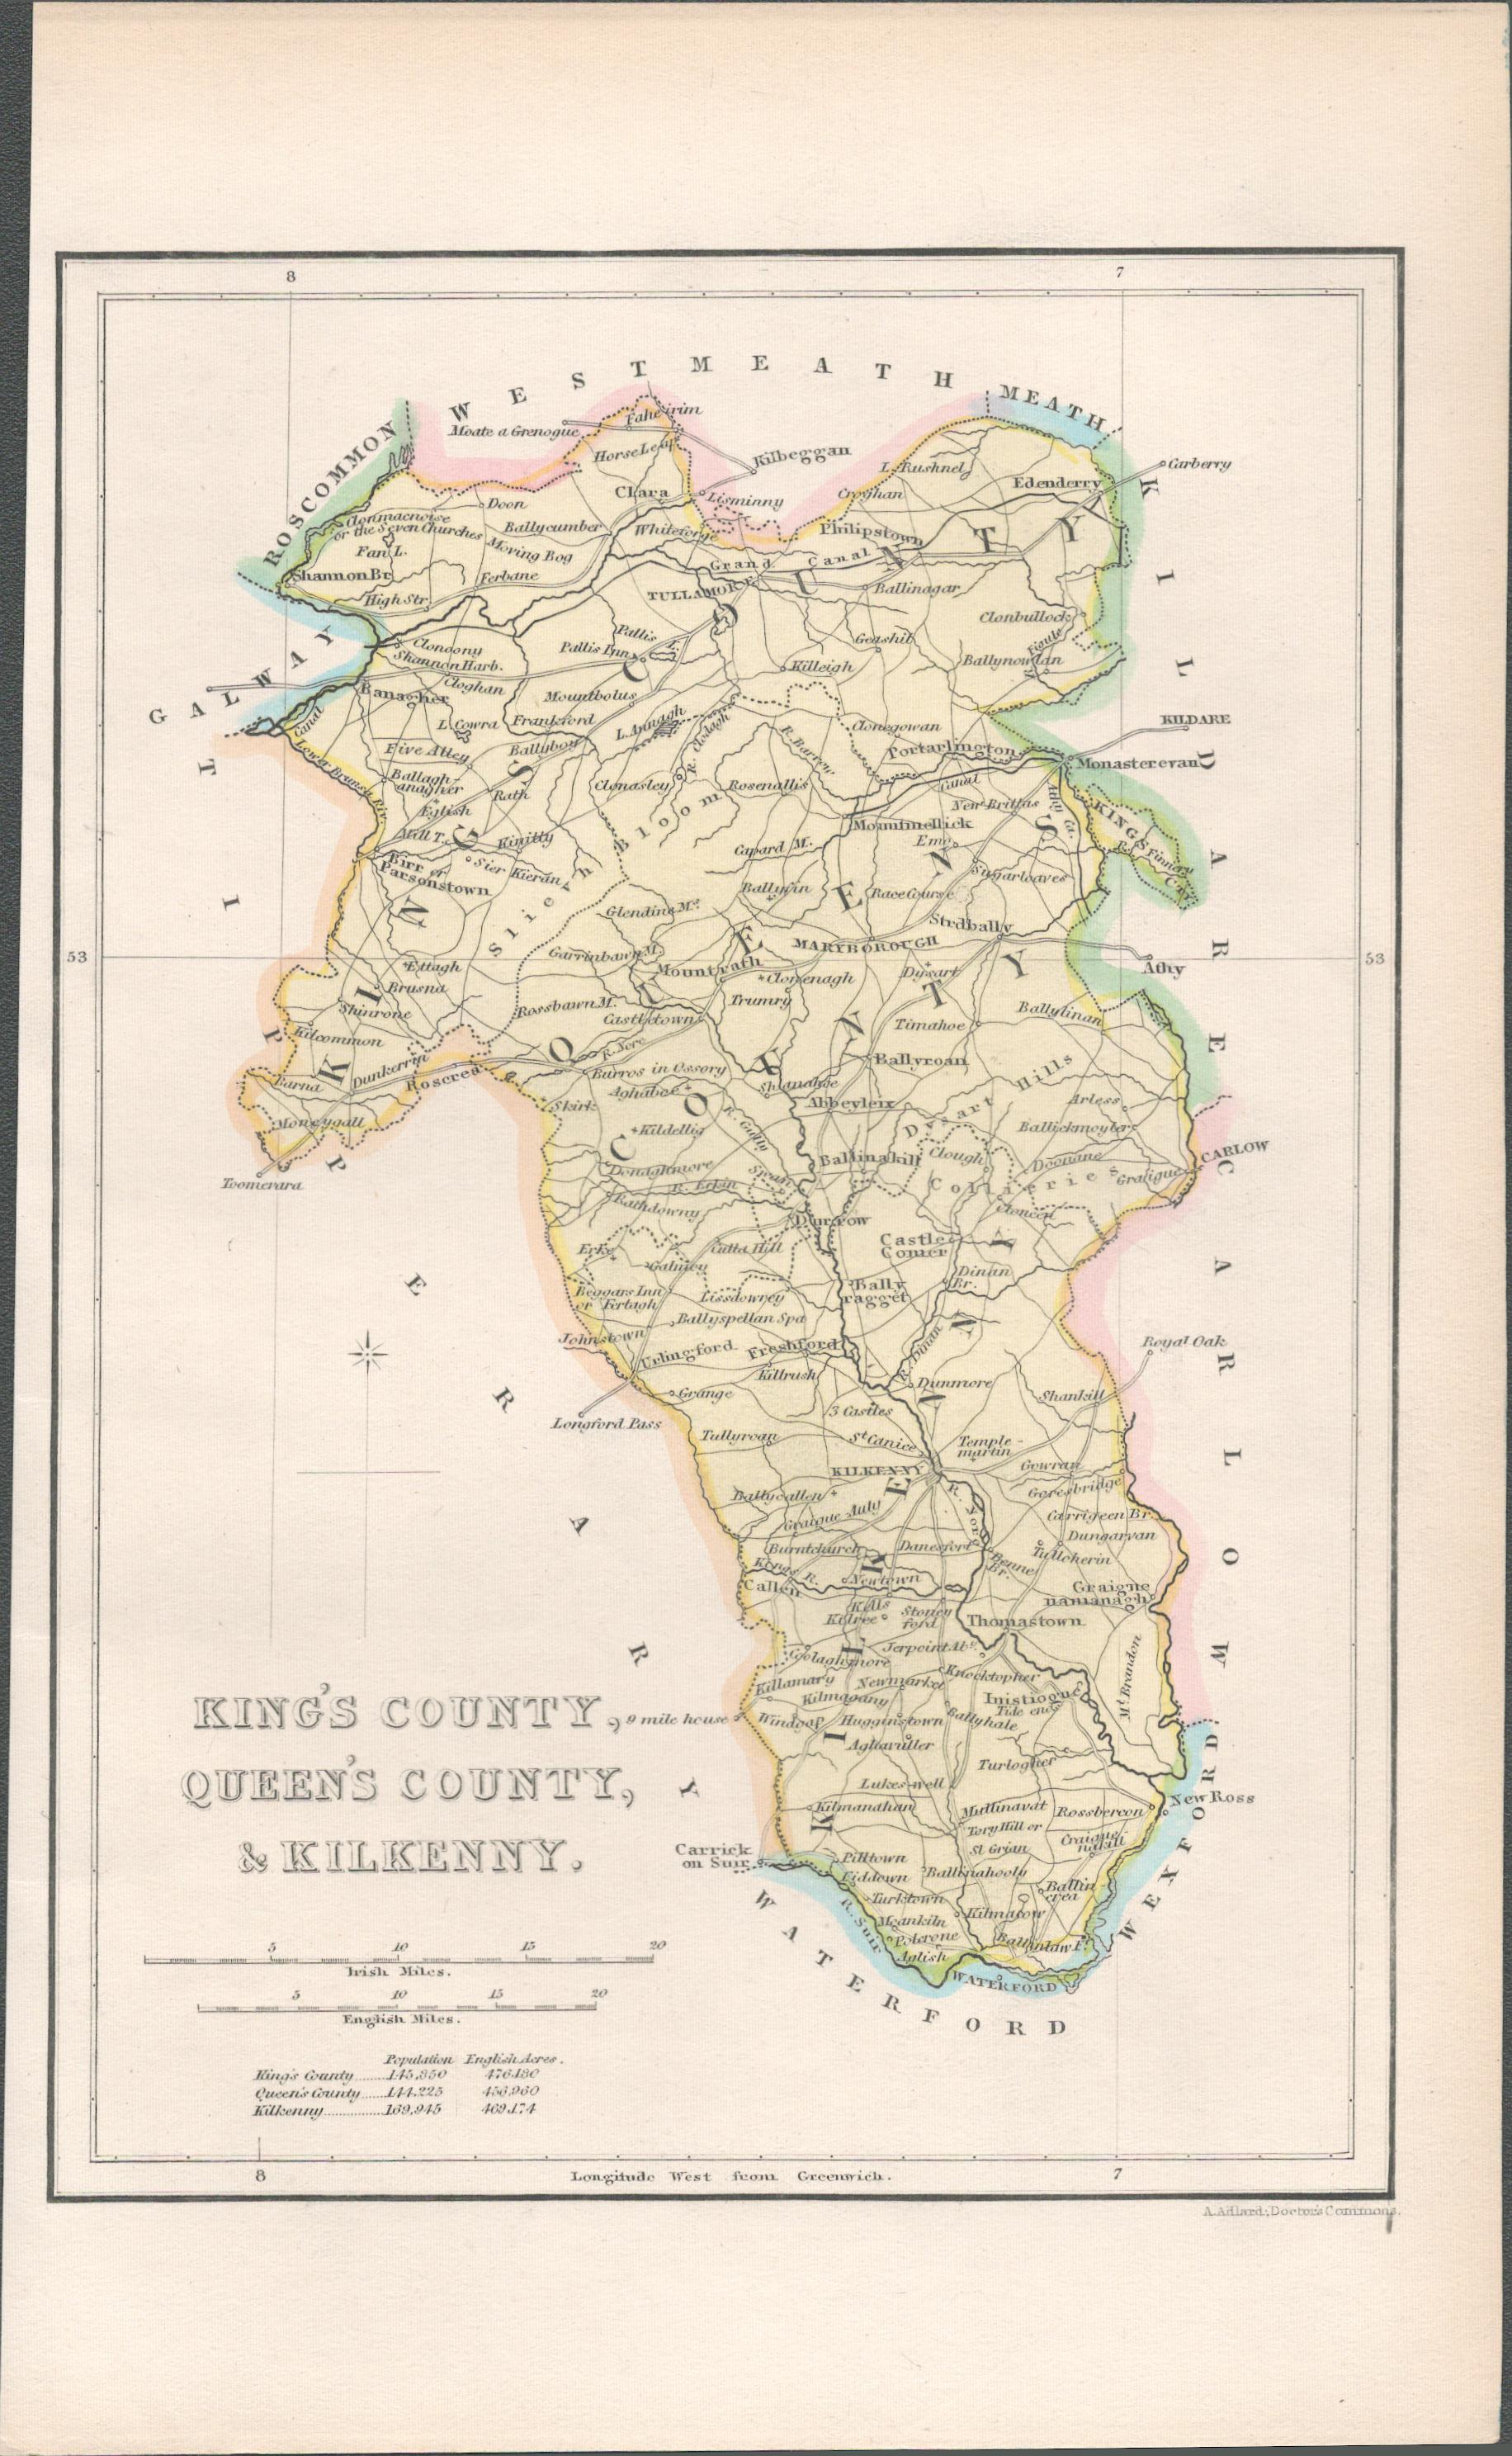 Antique Print 1850’s King & Queens County & Kilkenny.